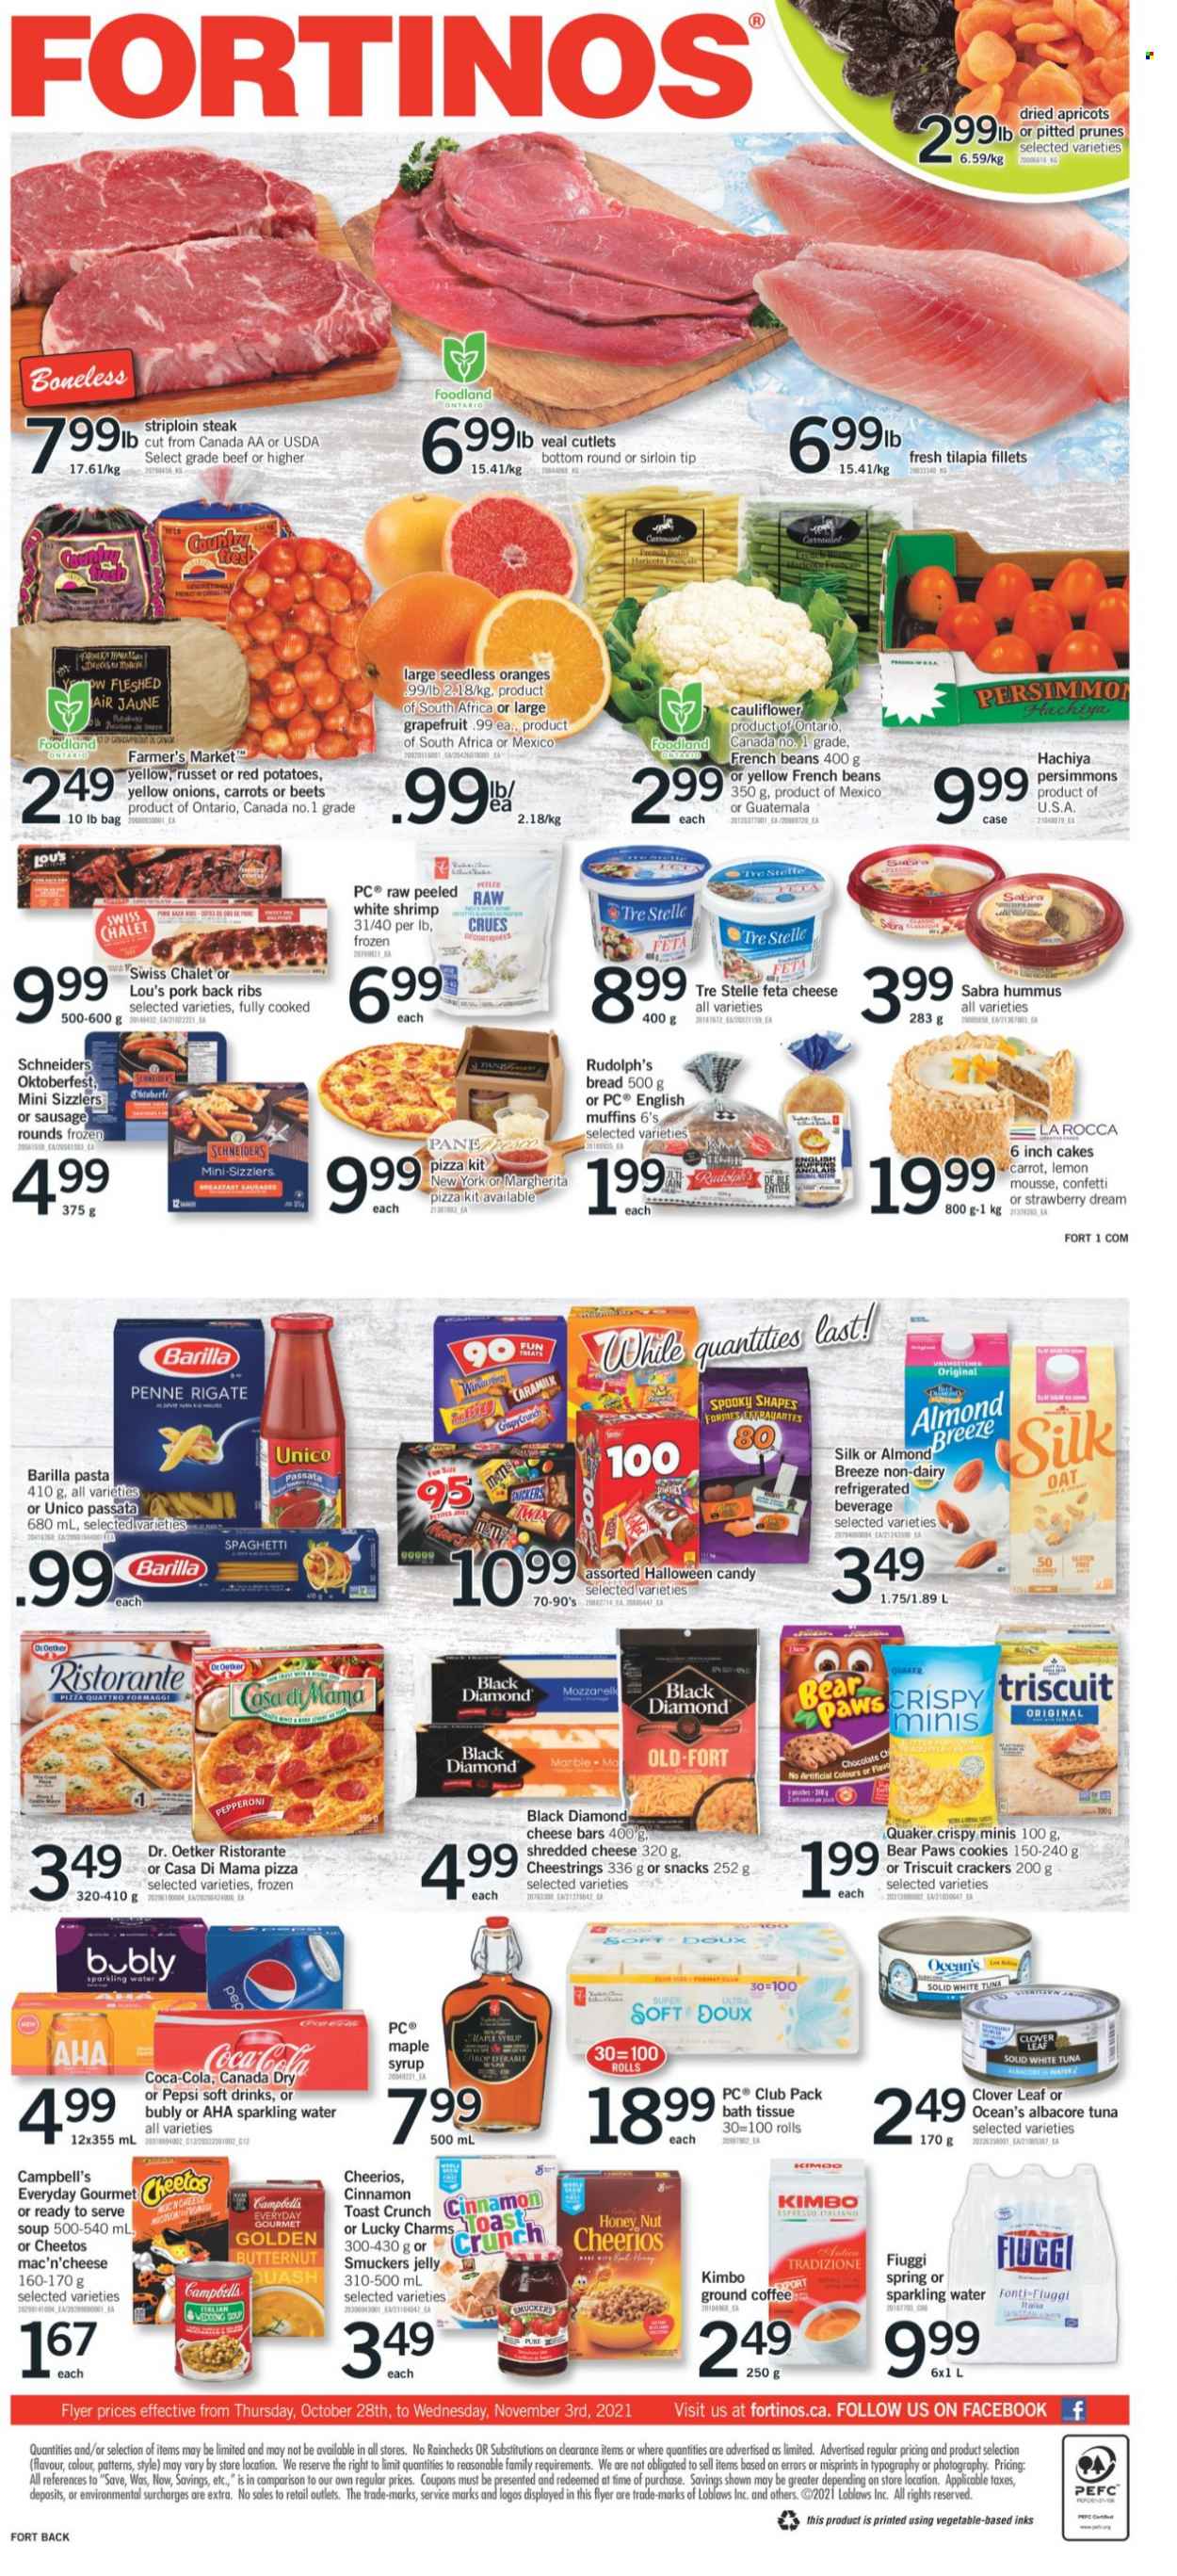 thumbnail - Fortinos Flyer - October 28, 2021 - November 03, 2021 - Sales products - bread, english muffins, cake, butternut squash, carrots, french beans, russet potatoes, red potatoes, grapefruits, persimmons, apricots, tilapia, tuna, shrimps, Campbell's, macaroni & cheese, spaghetti, soup, pasta, Barilla, Quaker, sausage, pepperoni, hummus, shredded cheese, string cheese, Dr. Oetker, feta, Clover, Silk, Almond Breeze, cookies, chocolate, jelly, crackers, Cheetos, oats, Cheerios, penne, cinnamon, syrup, prunes, dried fruit, Canada Dry, Coca-Cola, Pepsi, soft drink, sparkling water, coffee, ground coffee, beef meat, veal cutlet, veal meat, striploin steak, pork meat, pork ribs, pork back ribs, bath tissue, pan, Paws, Lack, Halloween, steak, oranges. Page 1.